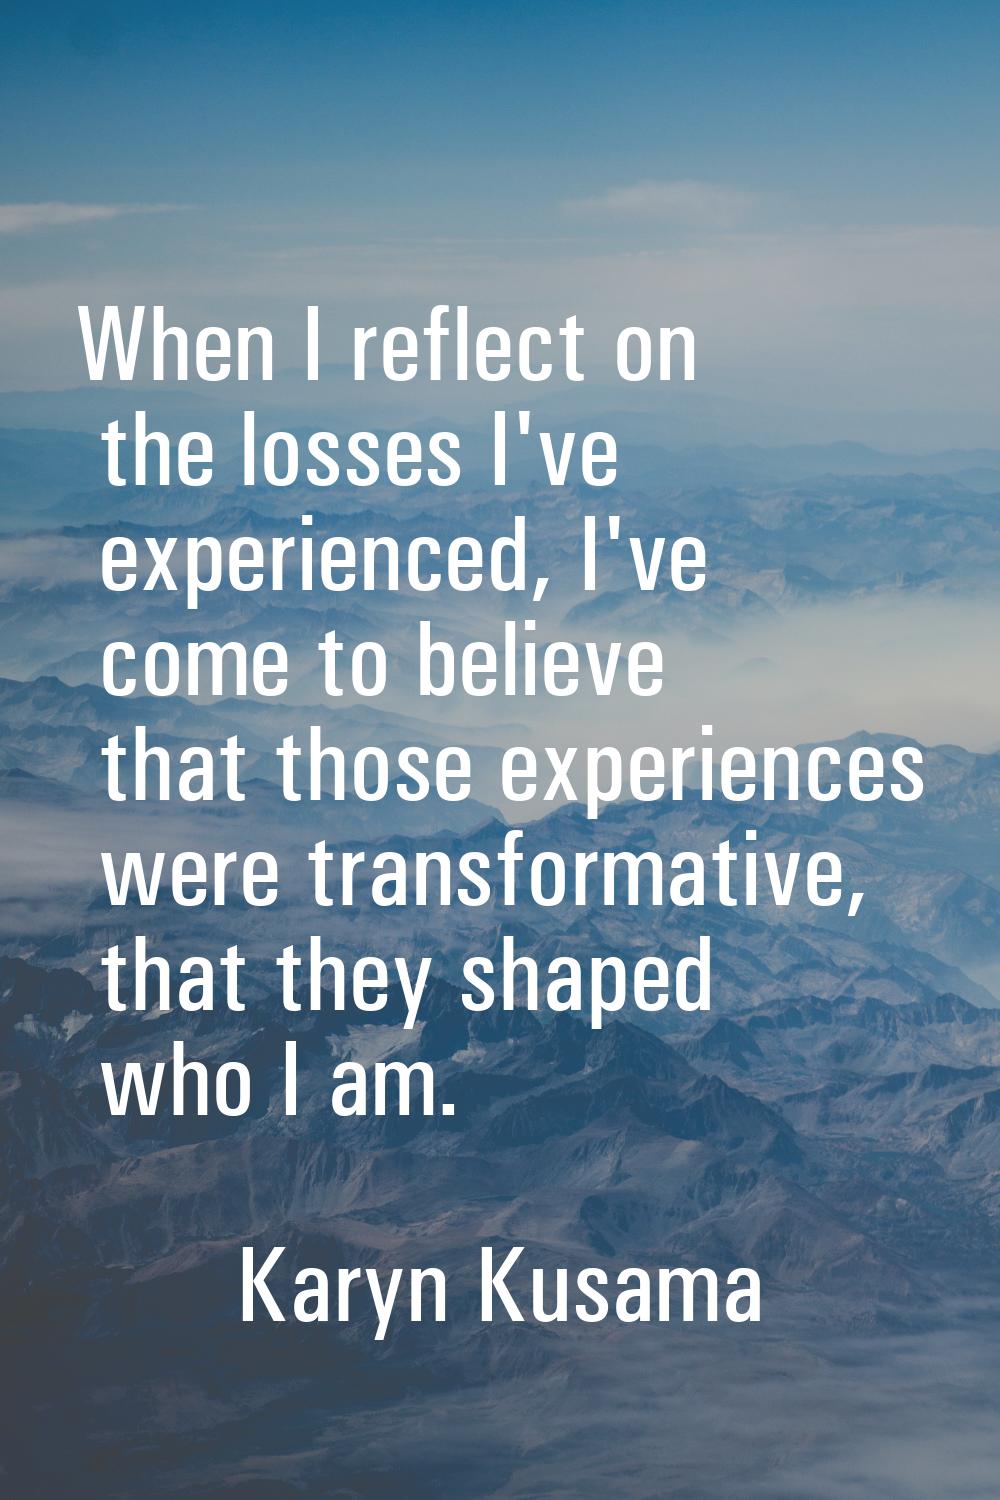 When I reflect on the losses I've experienced, I've come to believe that those experiences were tra